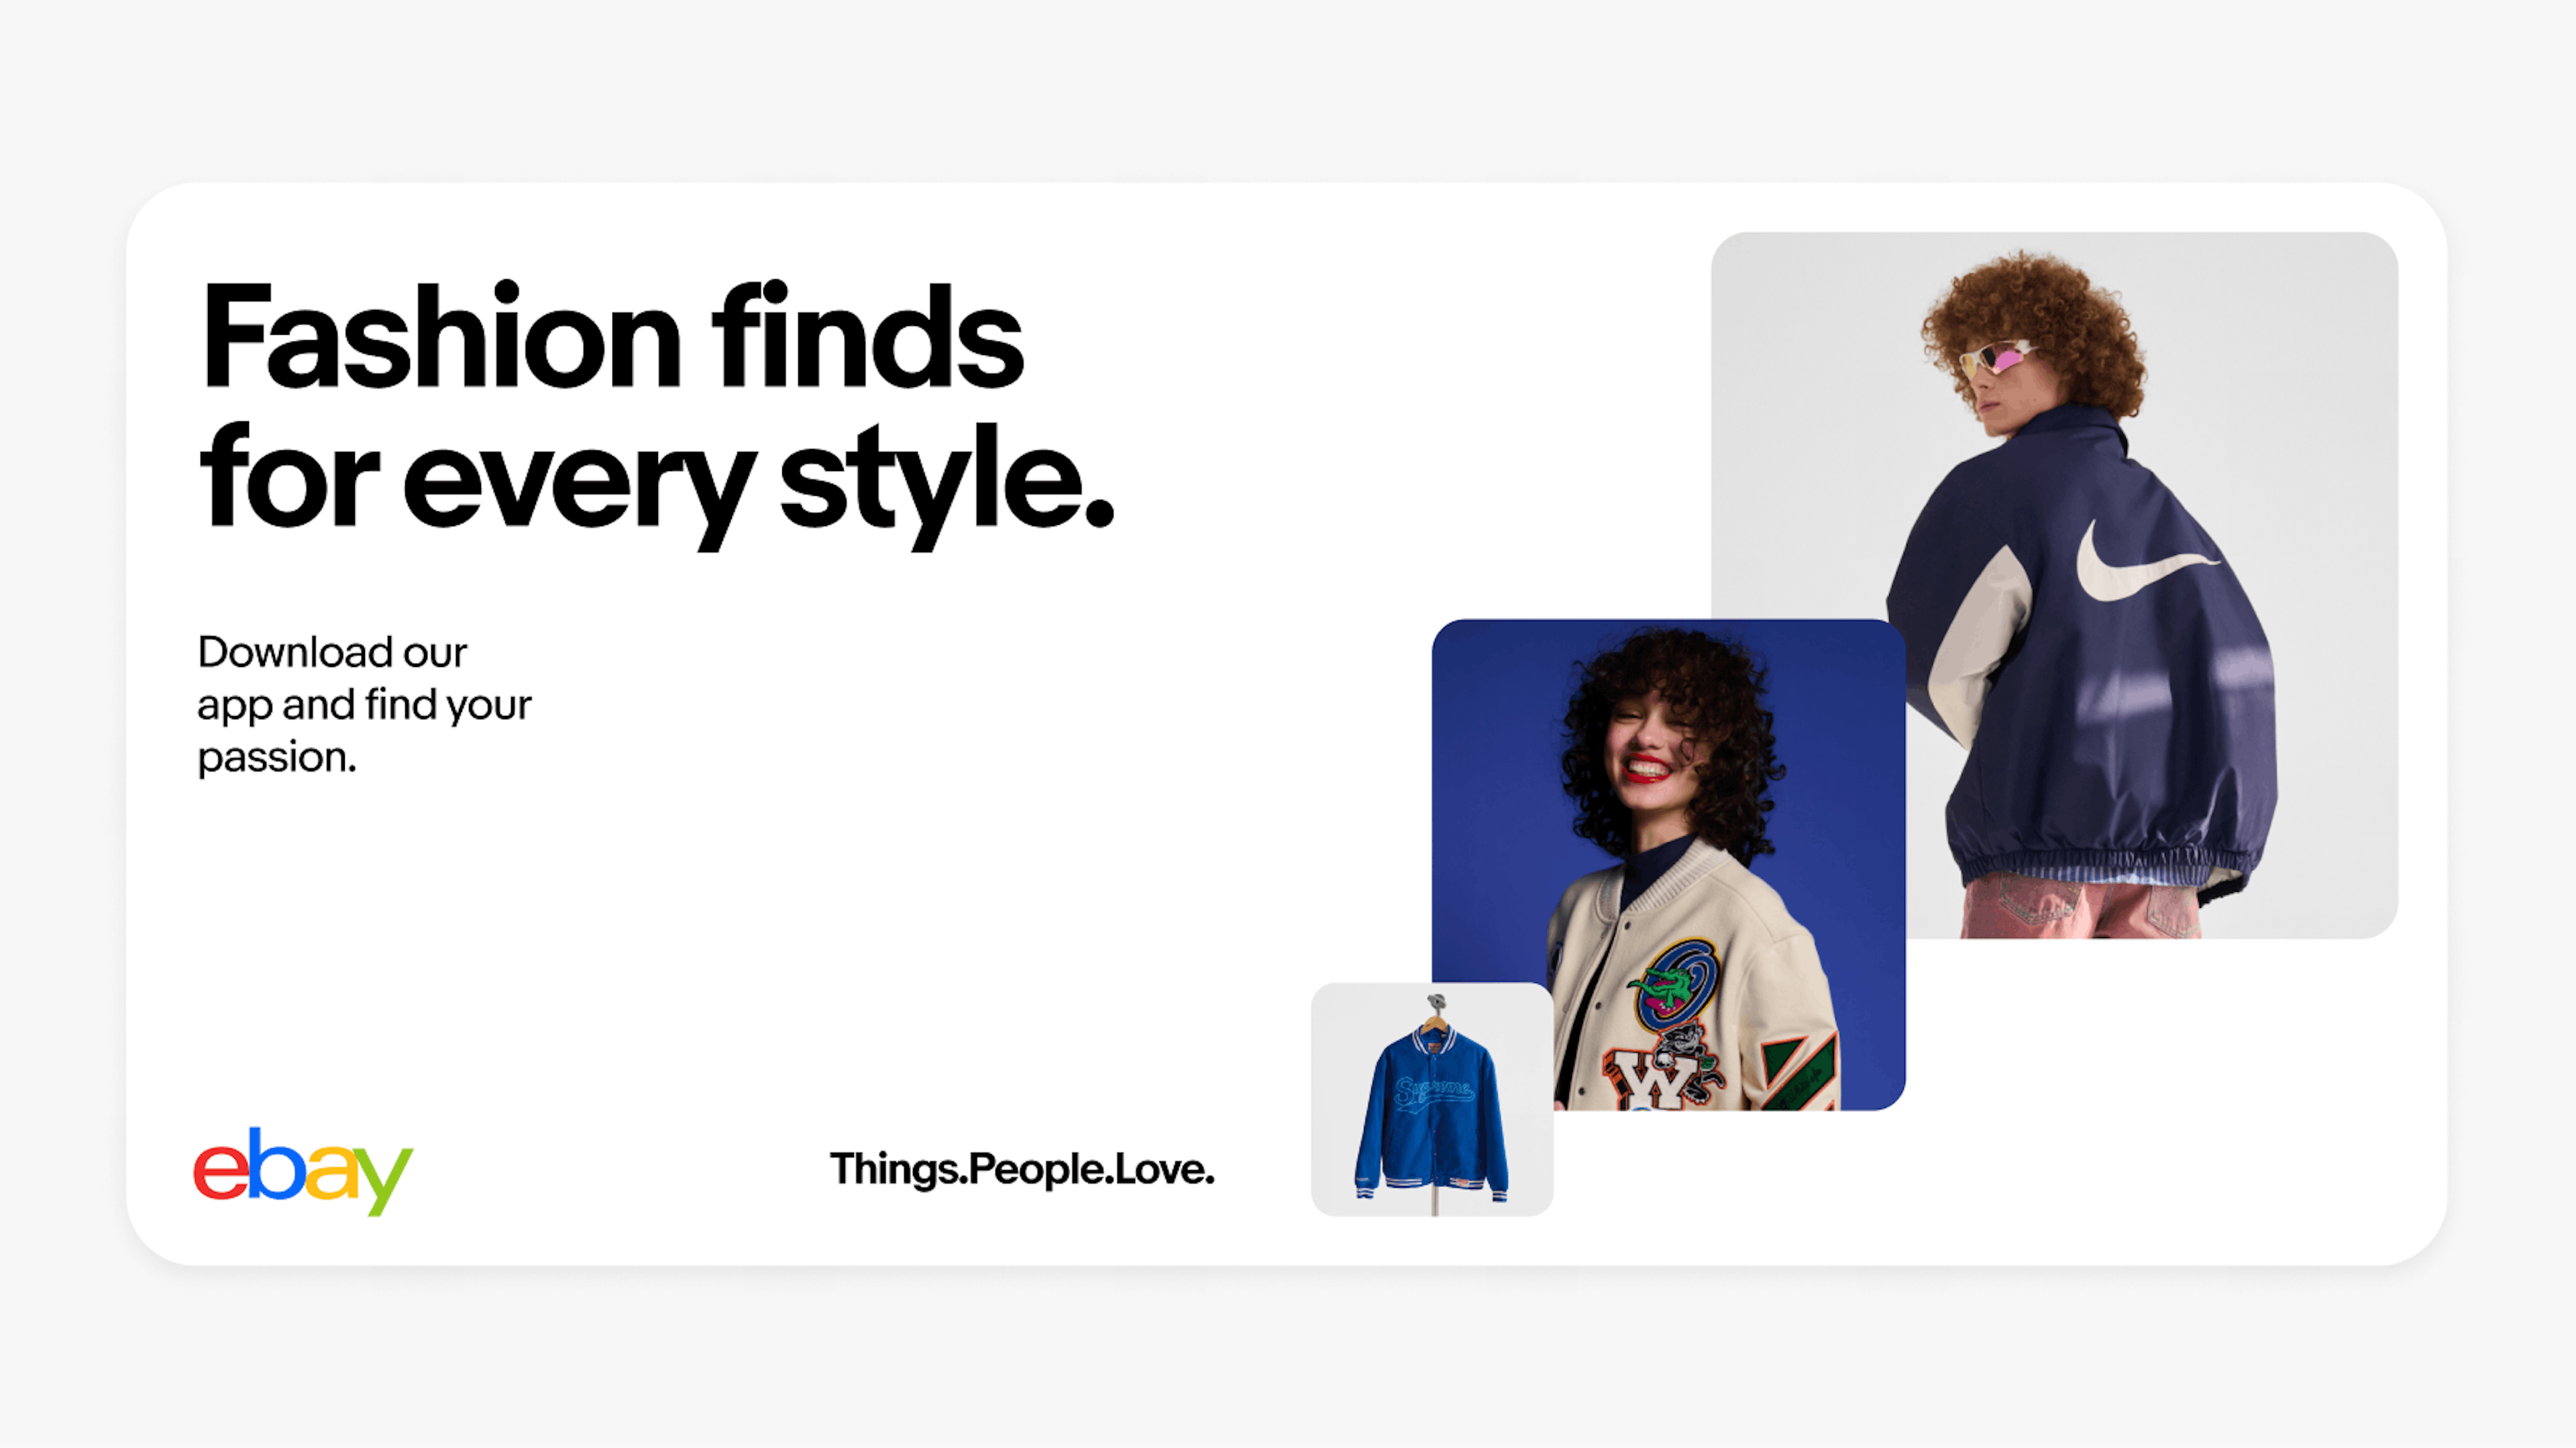 An advertisement for eBay promoting fashion finds with the text "Fashion finds for every style. Download our app and find your passion." It features images of stylish jackets and a smiling person wearing one.